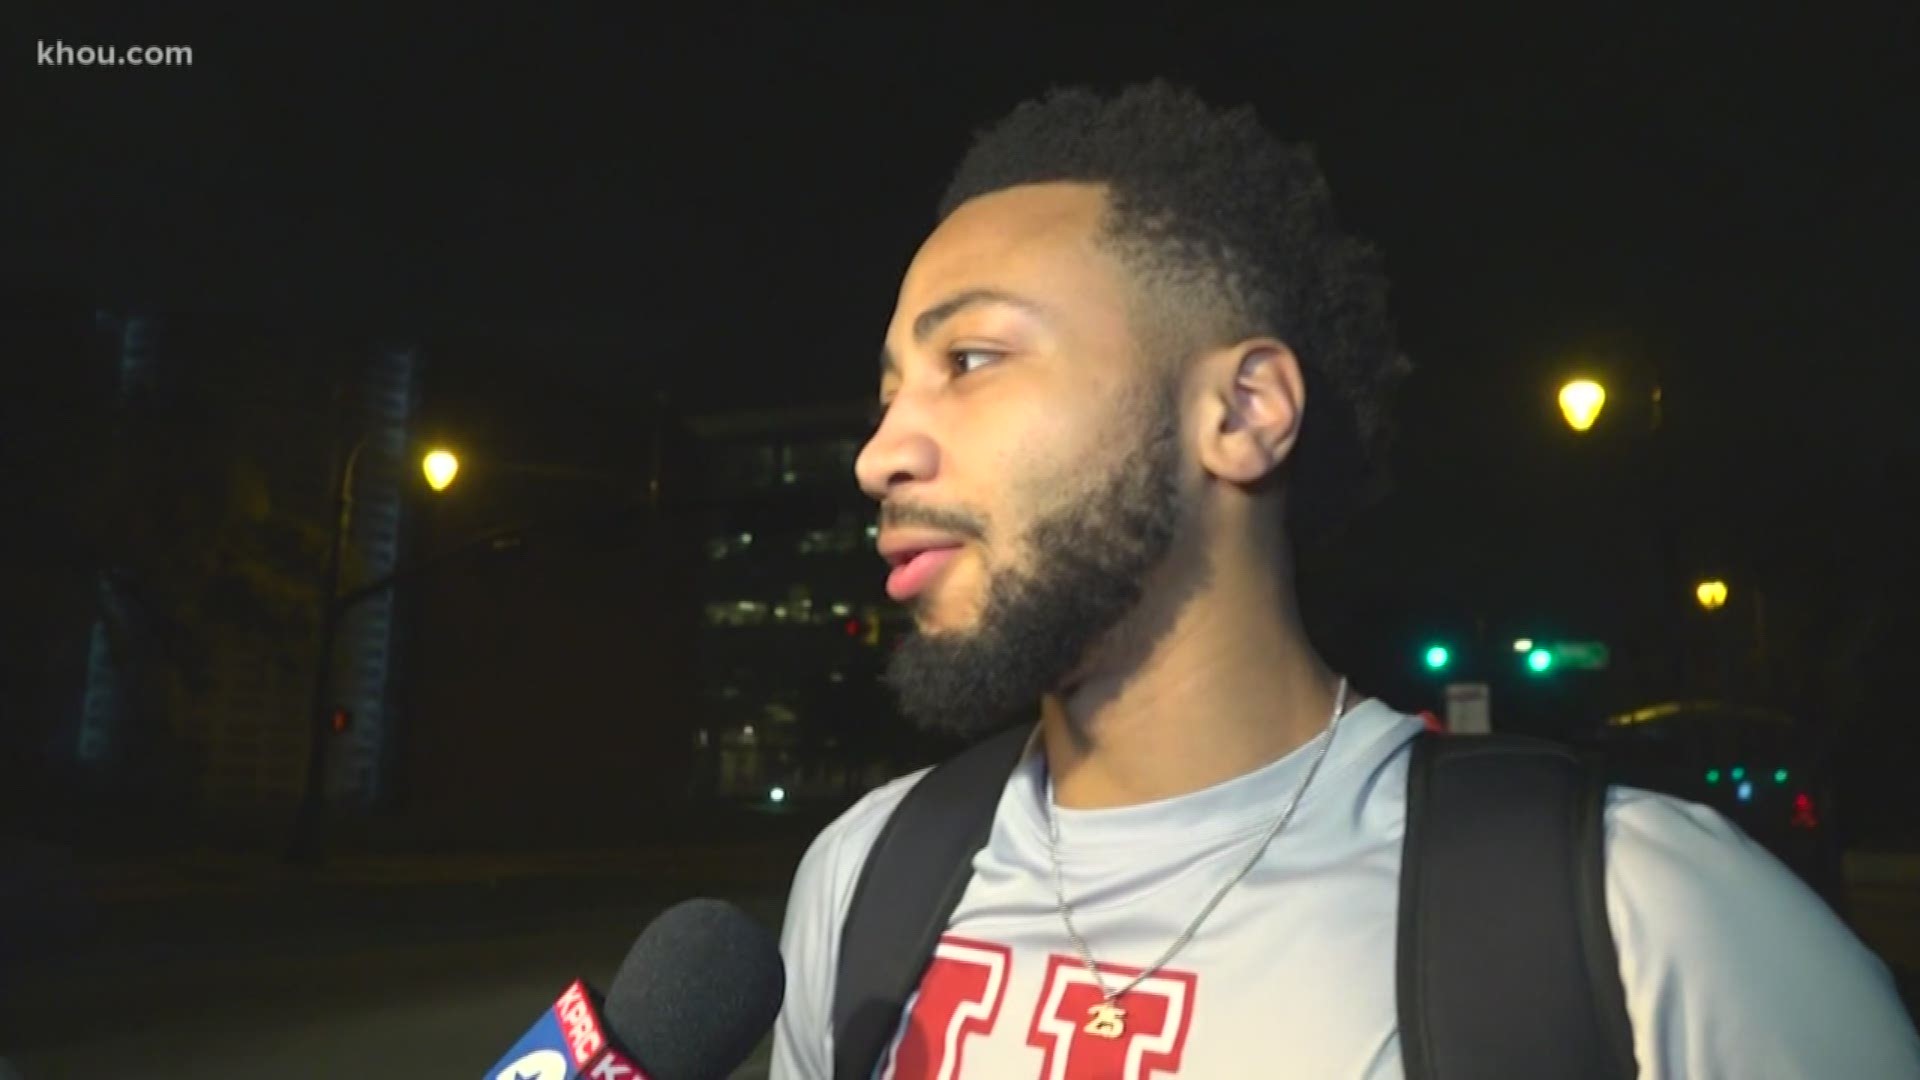 The University of Houston men's basketball team arrived in Houston early Monday morning after a big win Sunday night where they advanced to the Sweet 16 in the NCAA tournament.